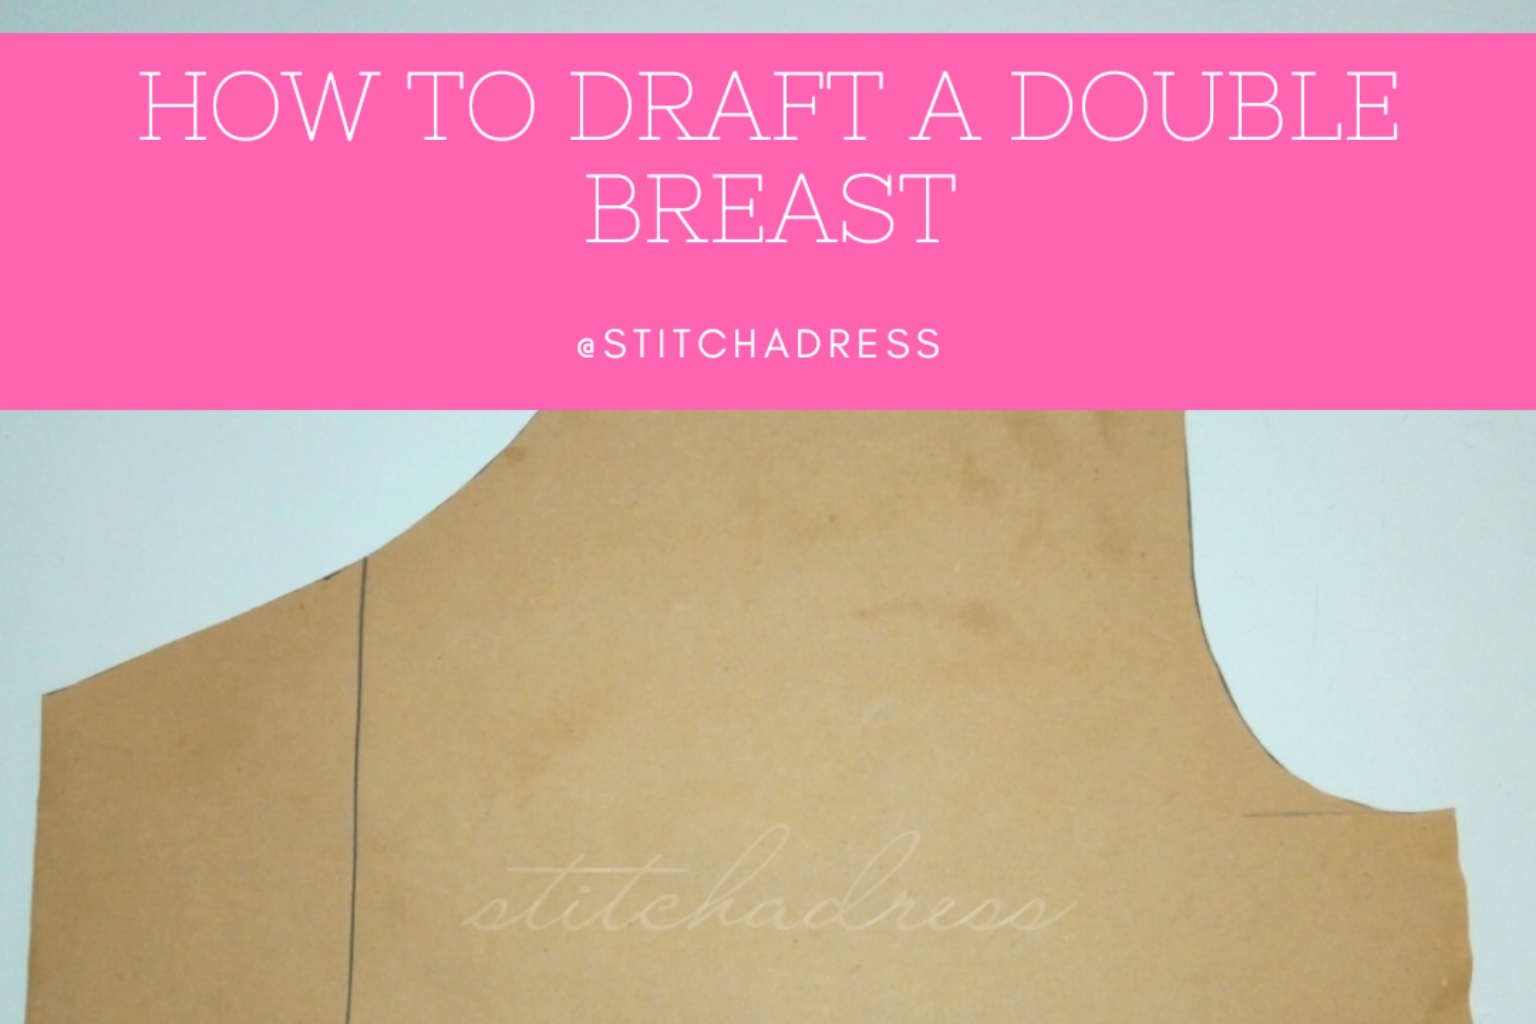 HOW TO DRAFT A DOUBLE BREAST